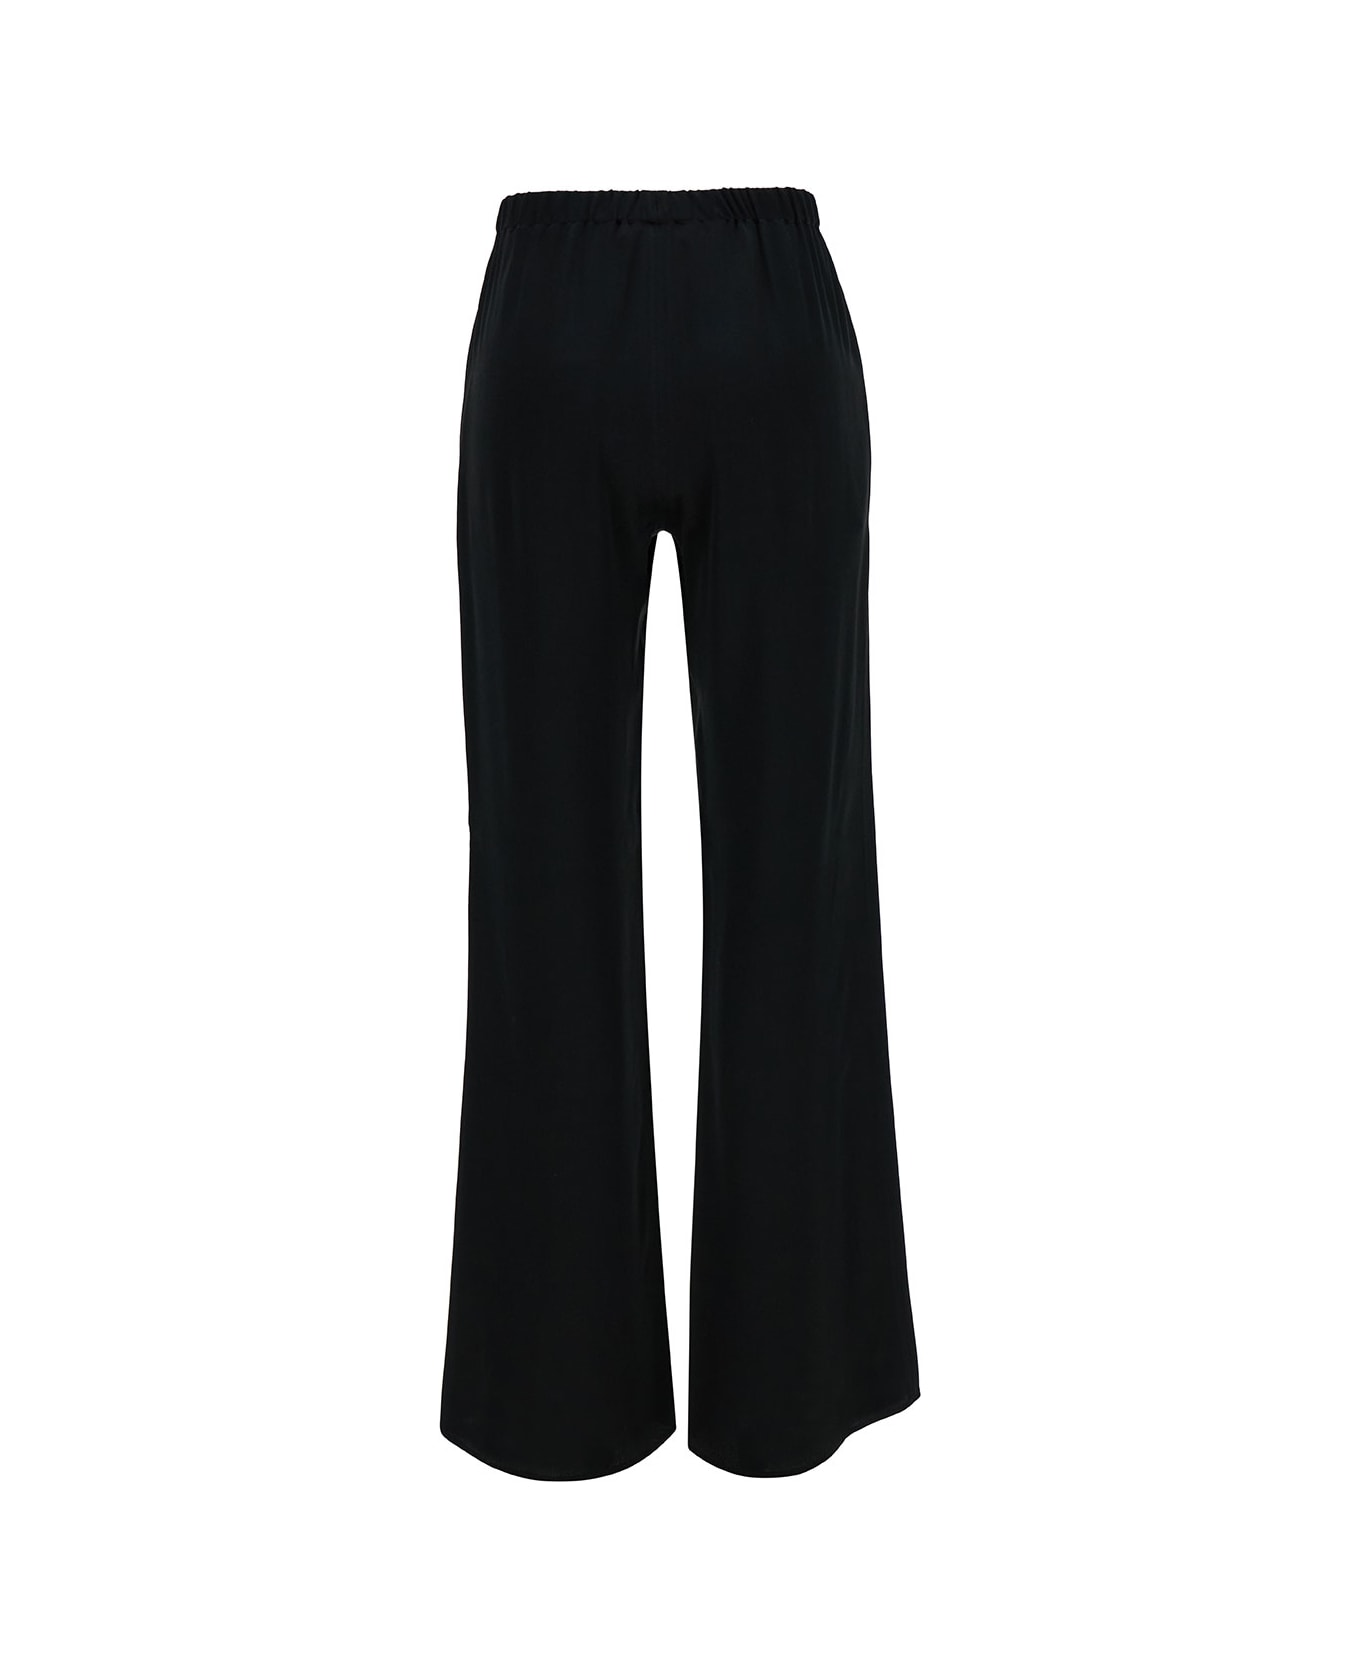 Antonelli Black Loose Pants With Elastic Waistband In Silk Blend Woman - Black ボトムス